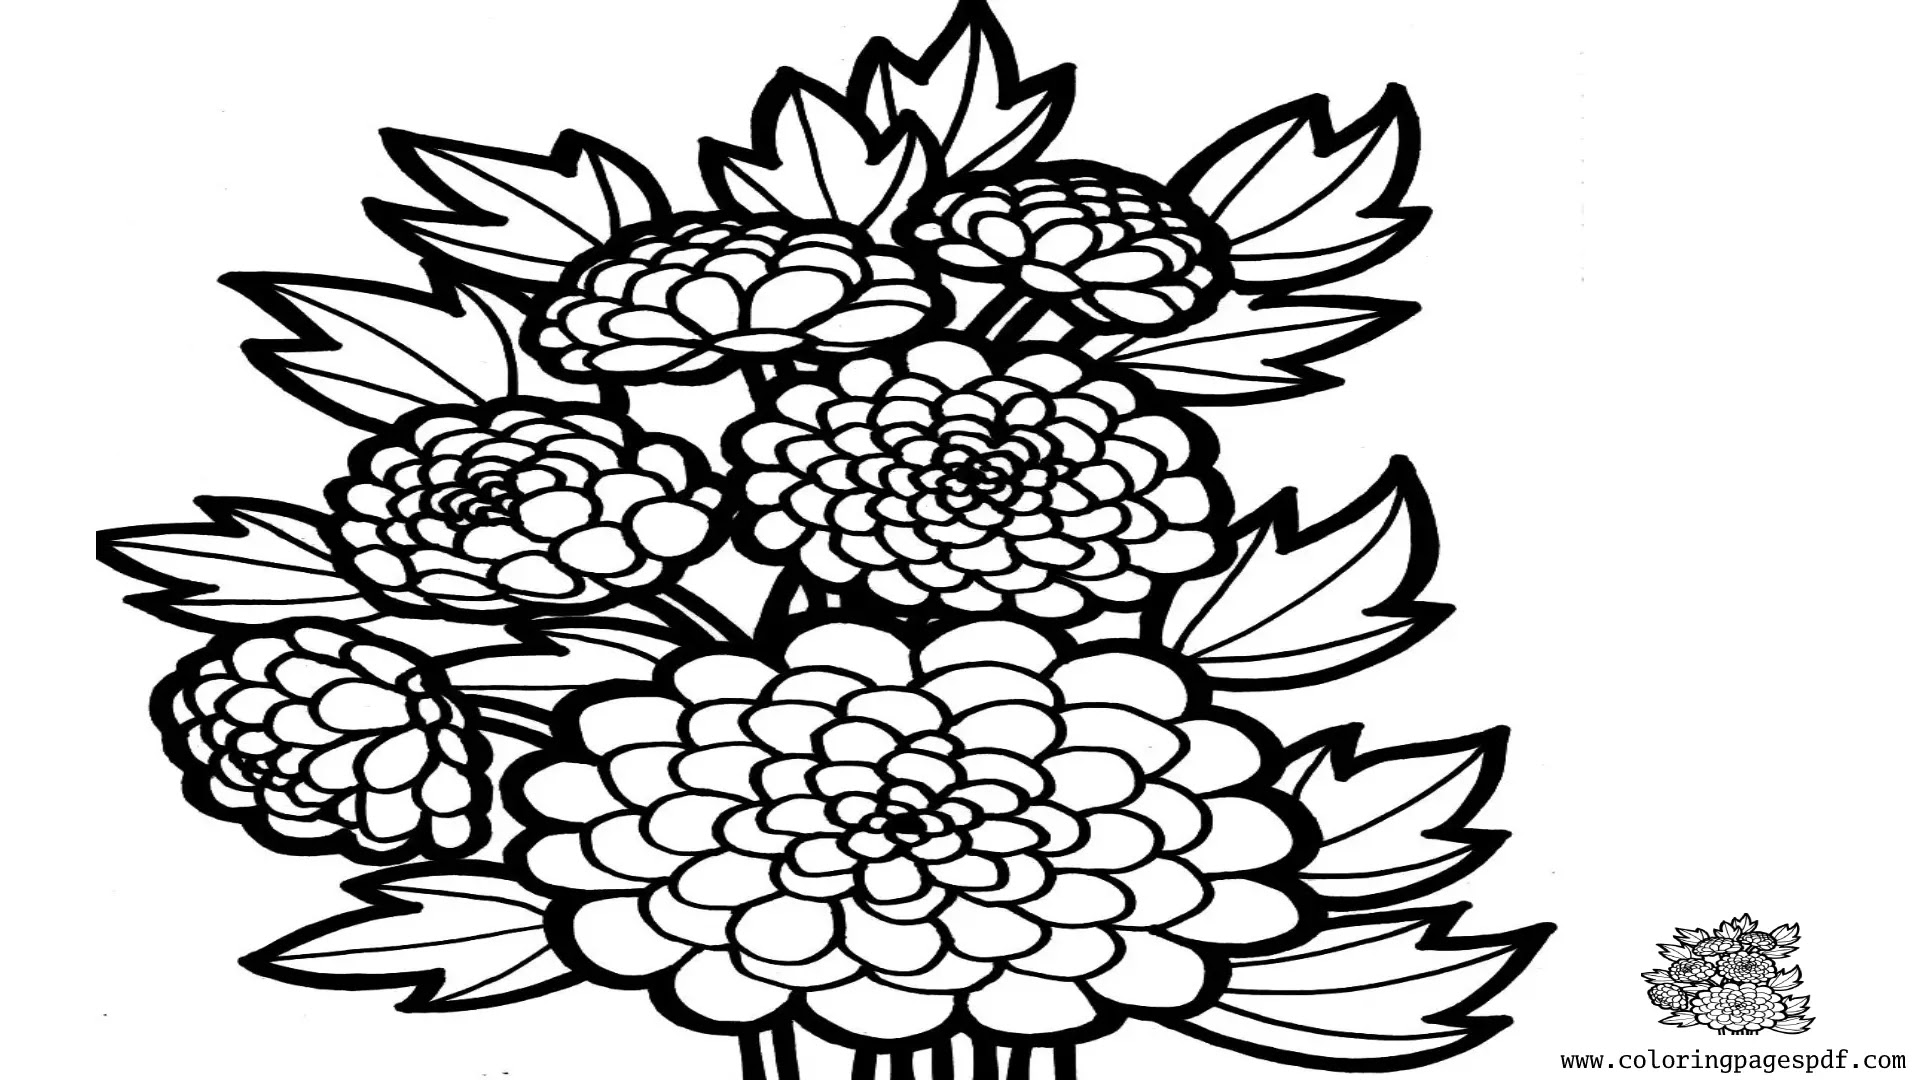 Coloring Page Of Six Beautiful Flowers